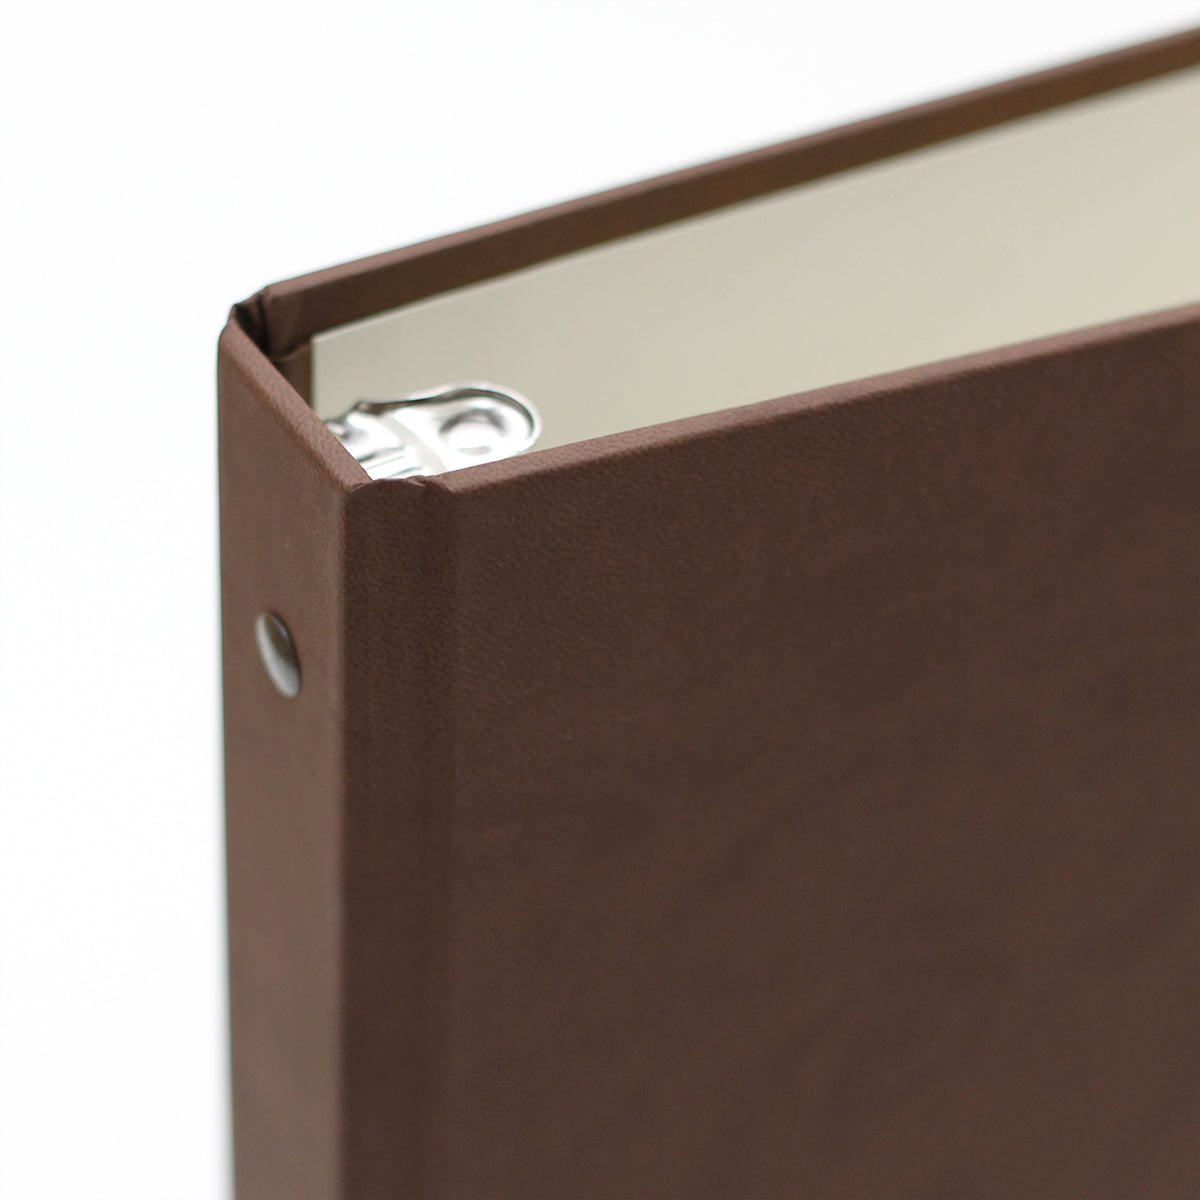 Storage Binder for Photos or Documents with Mocha Vegan Leather Cover